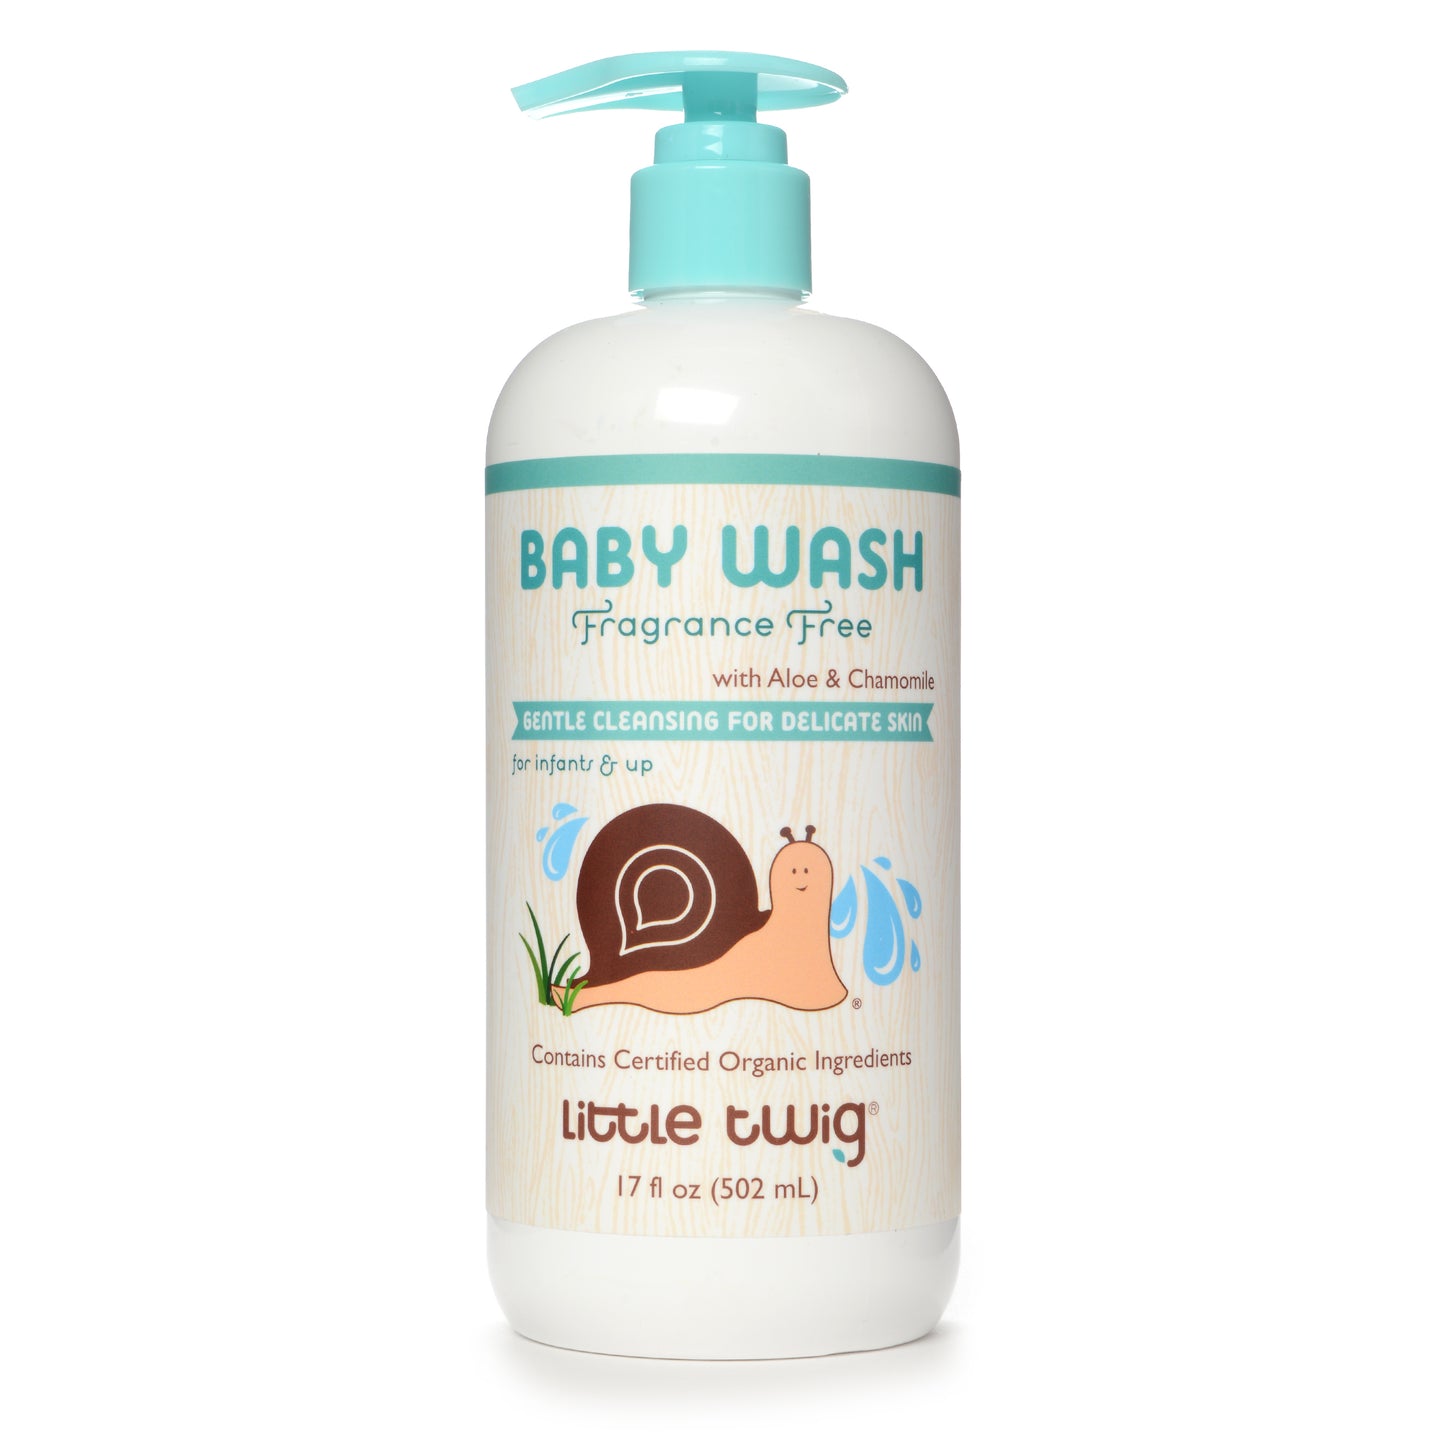 Fragrance Free Baby Wash 2-in-1